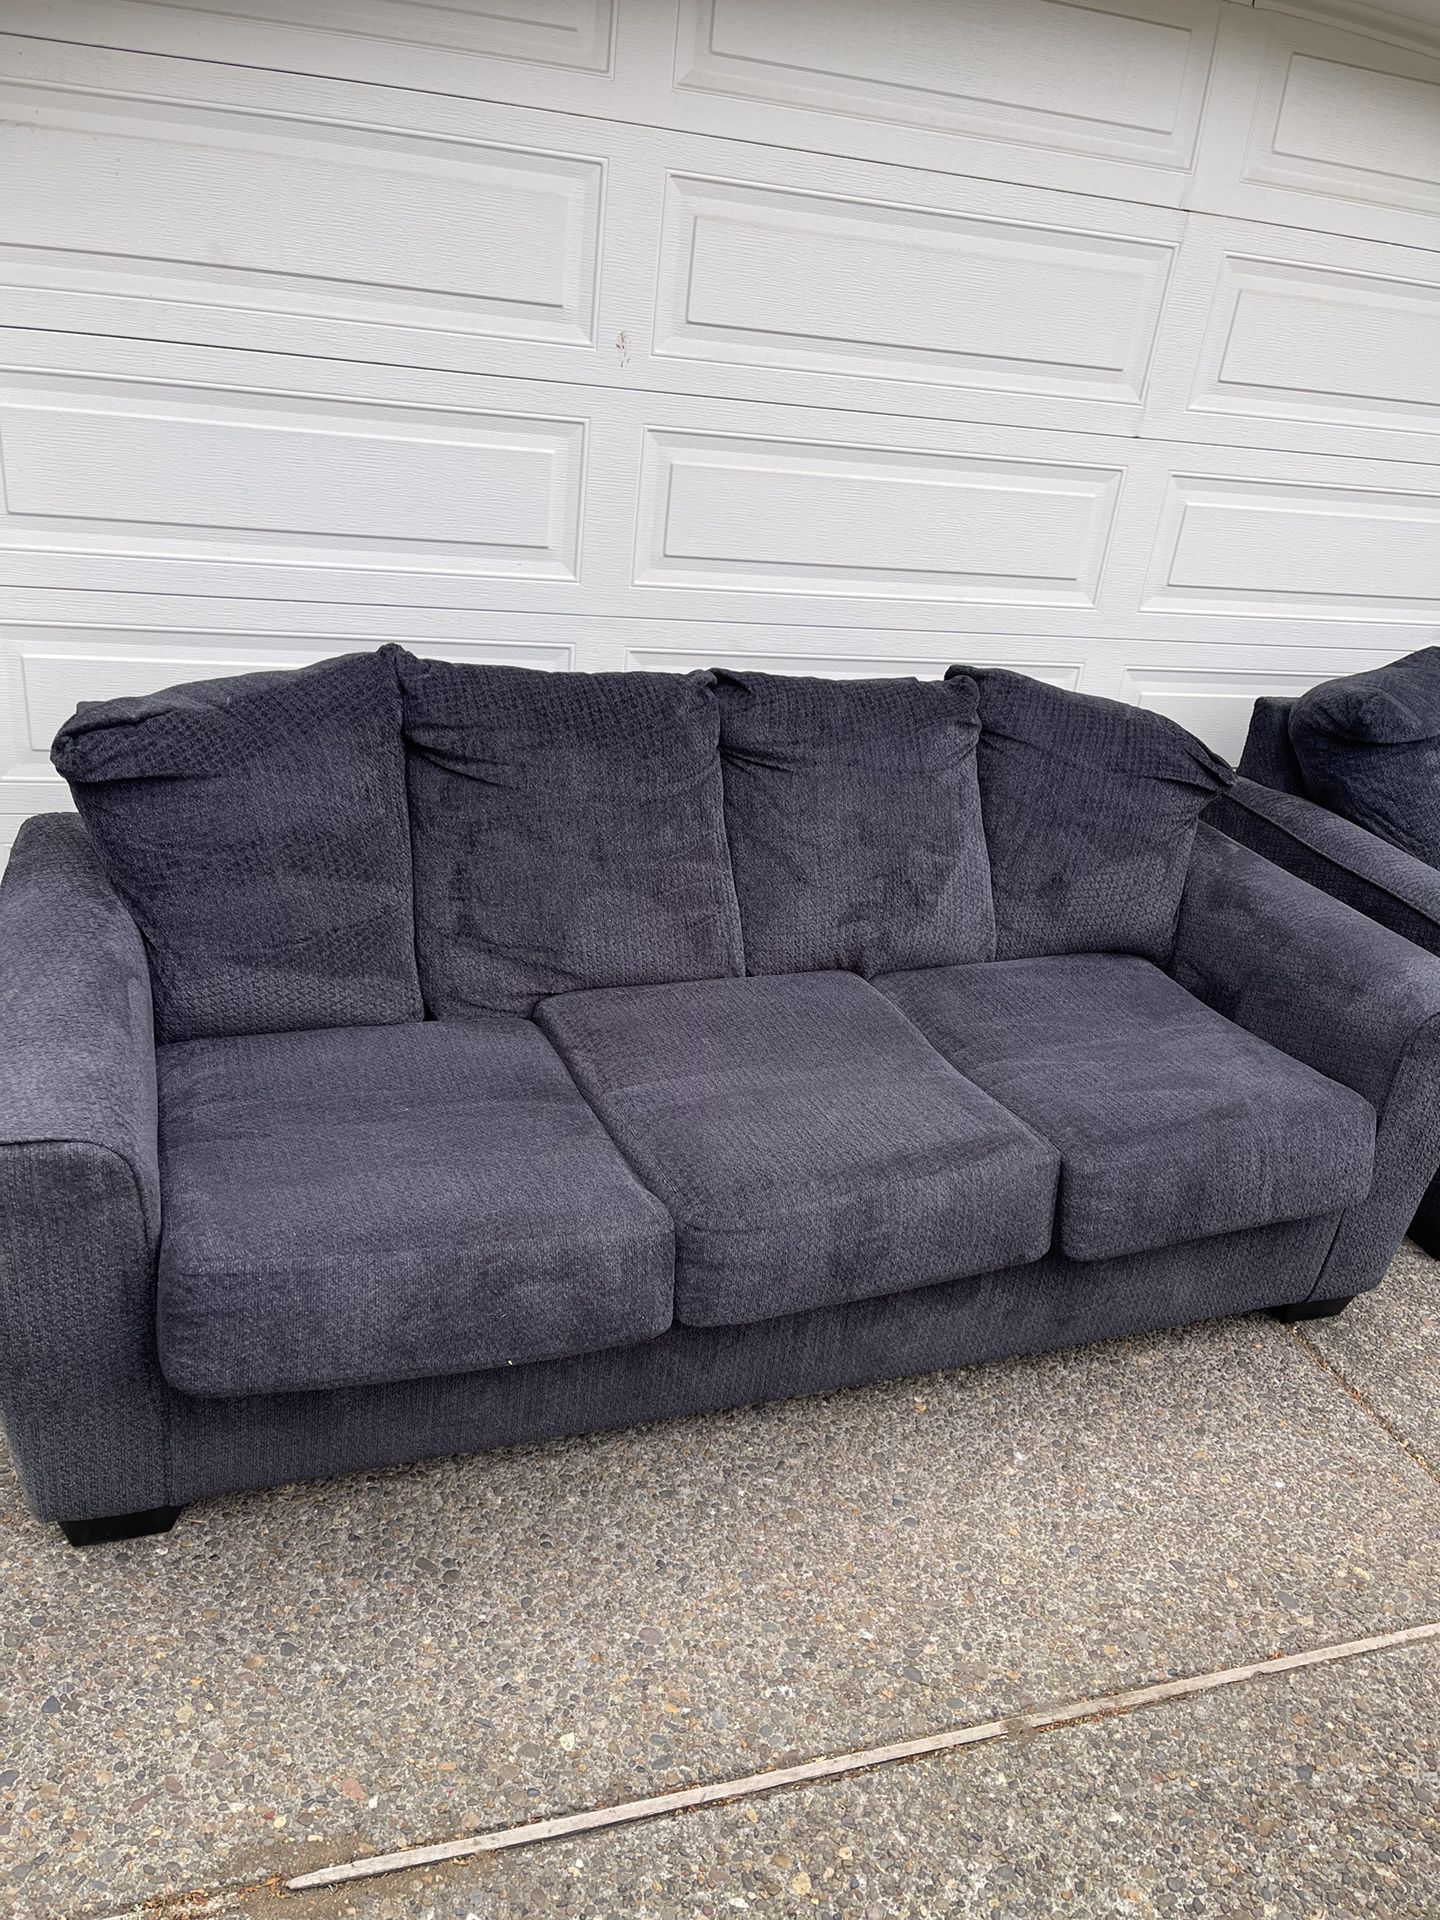 Couch And Love Seat Set Great Condition 